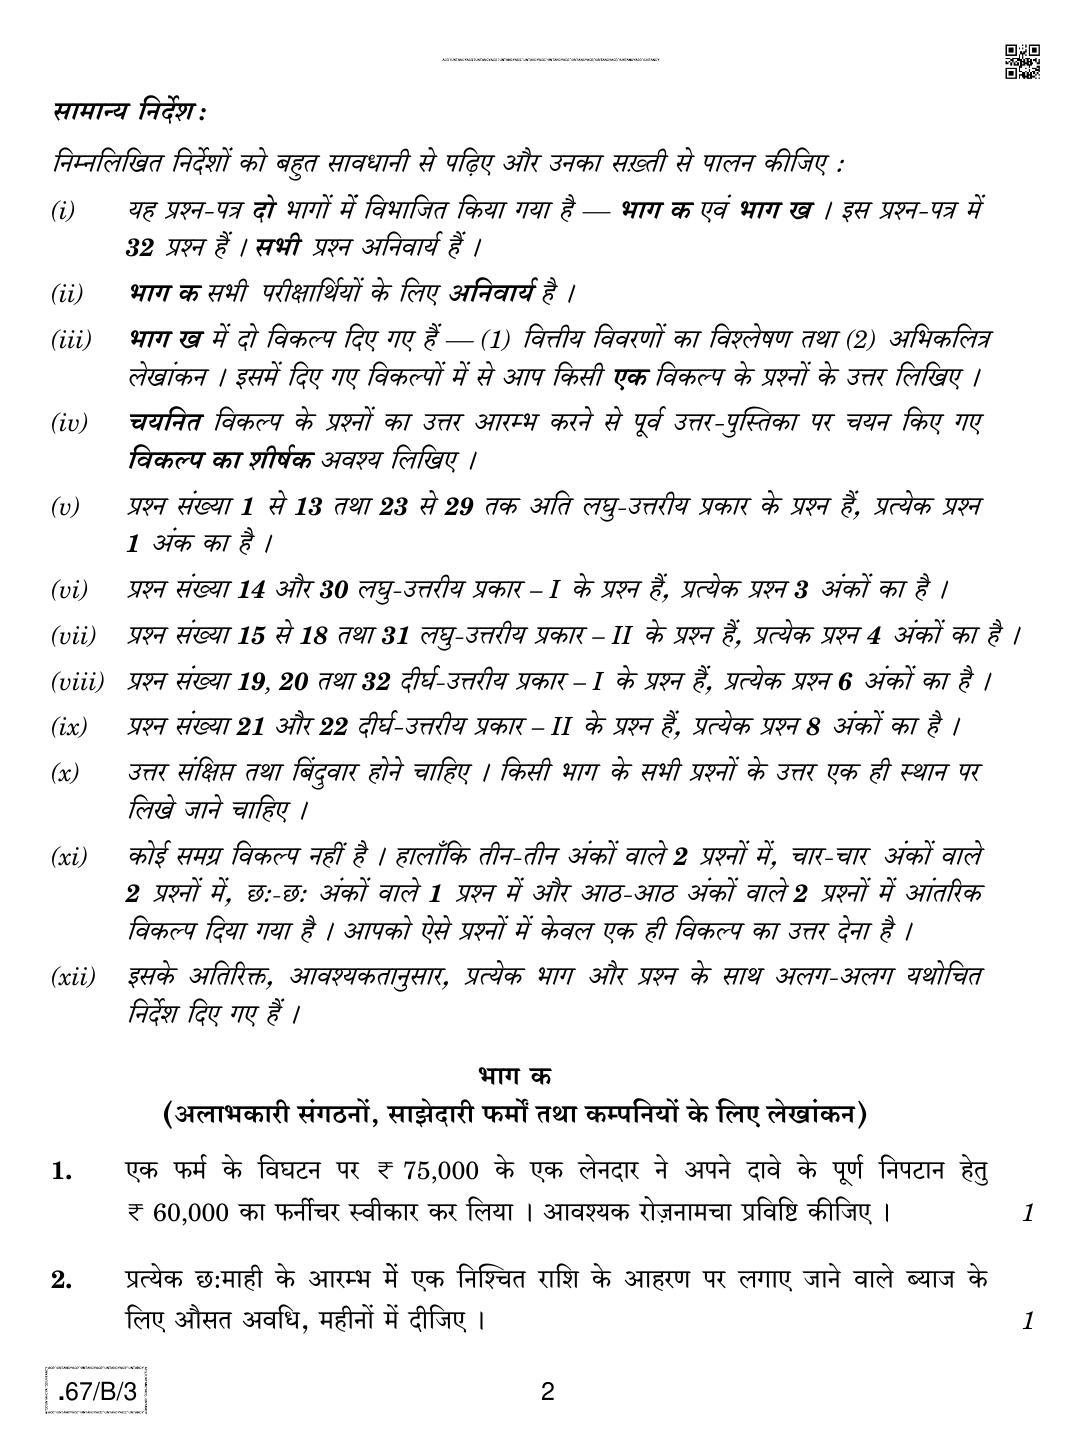 CBSE Class 12 67-C-3 - Accountancy 2020 Compartment Question Paper - Page 2